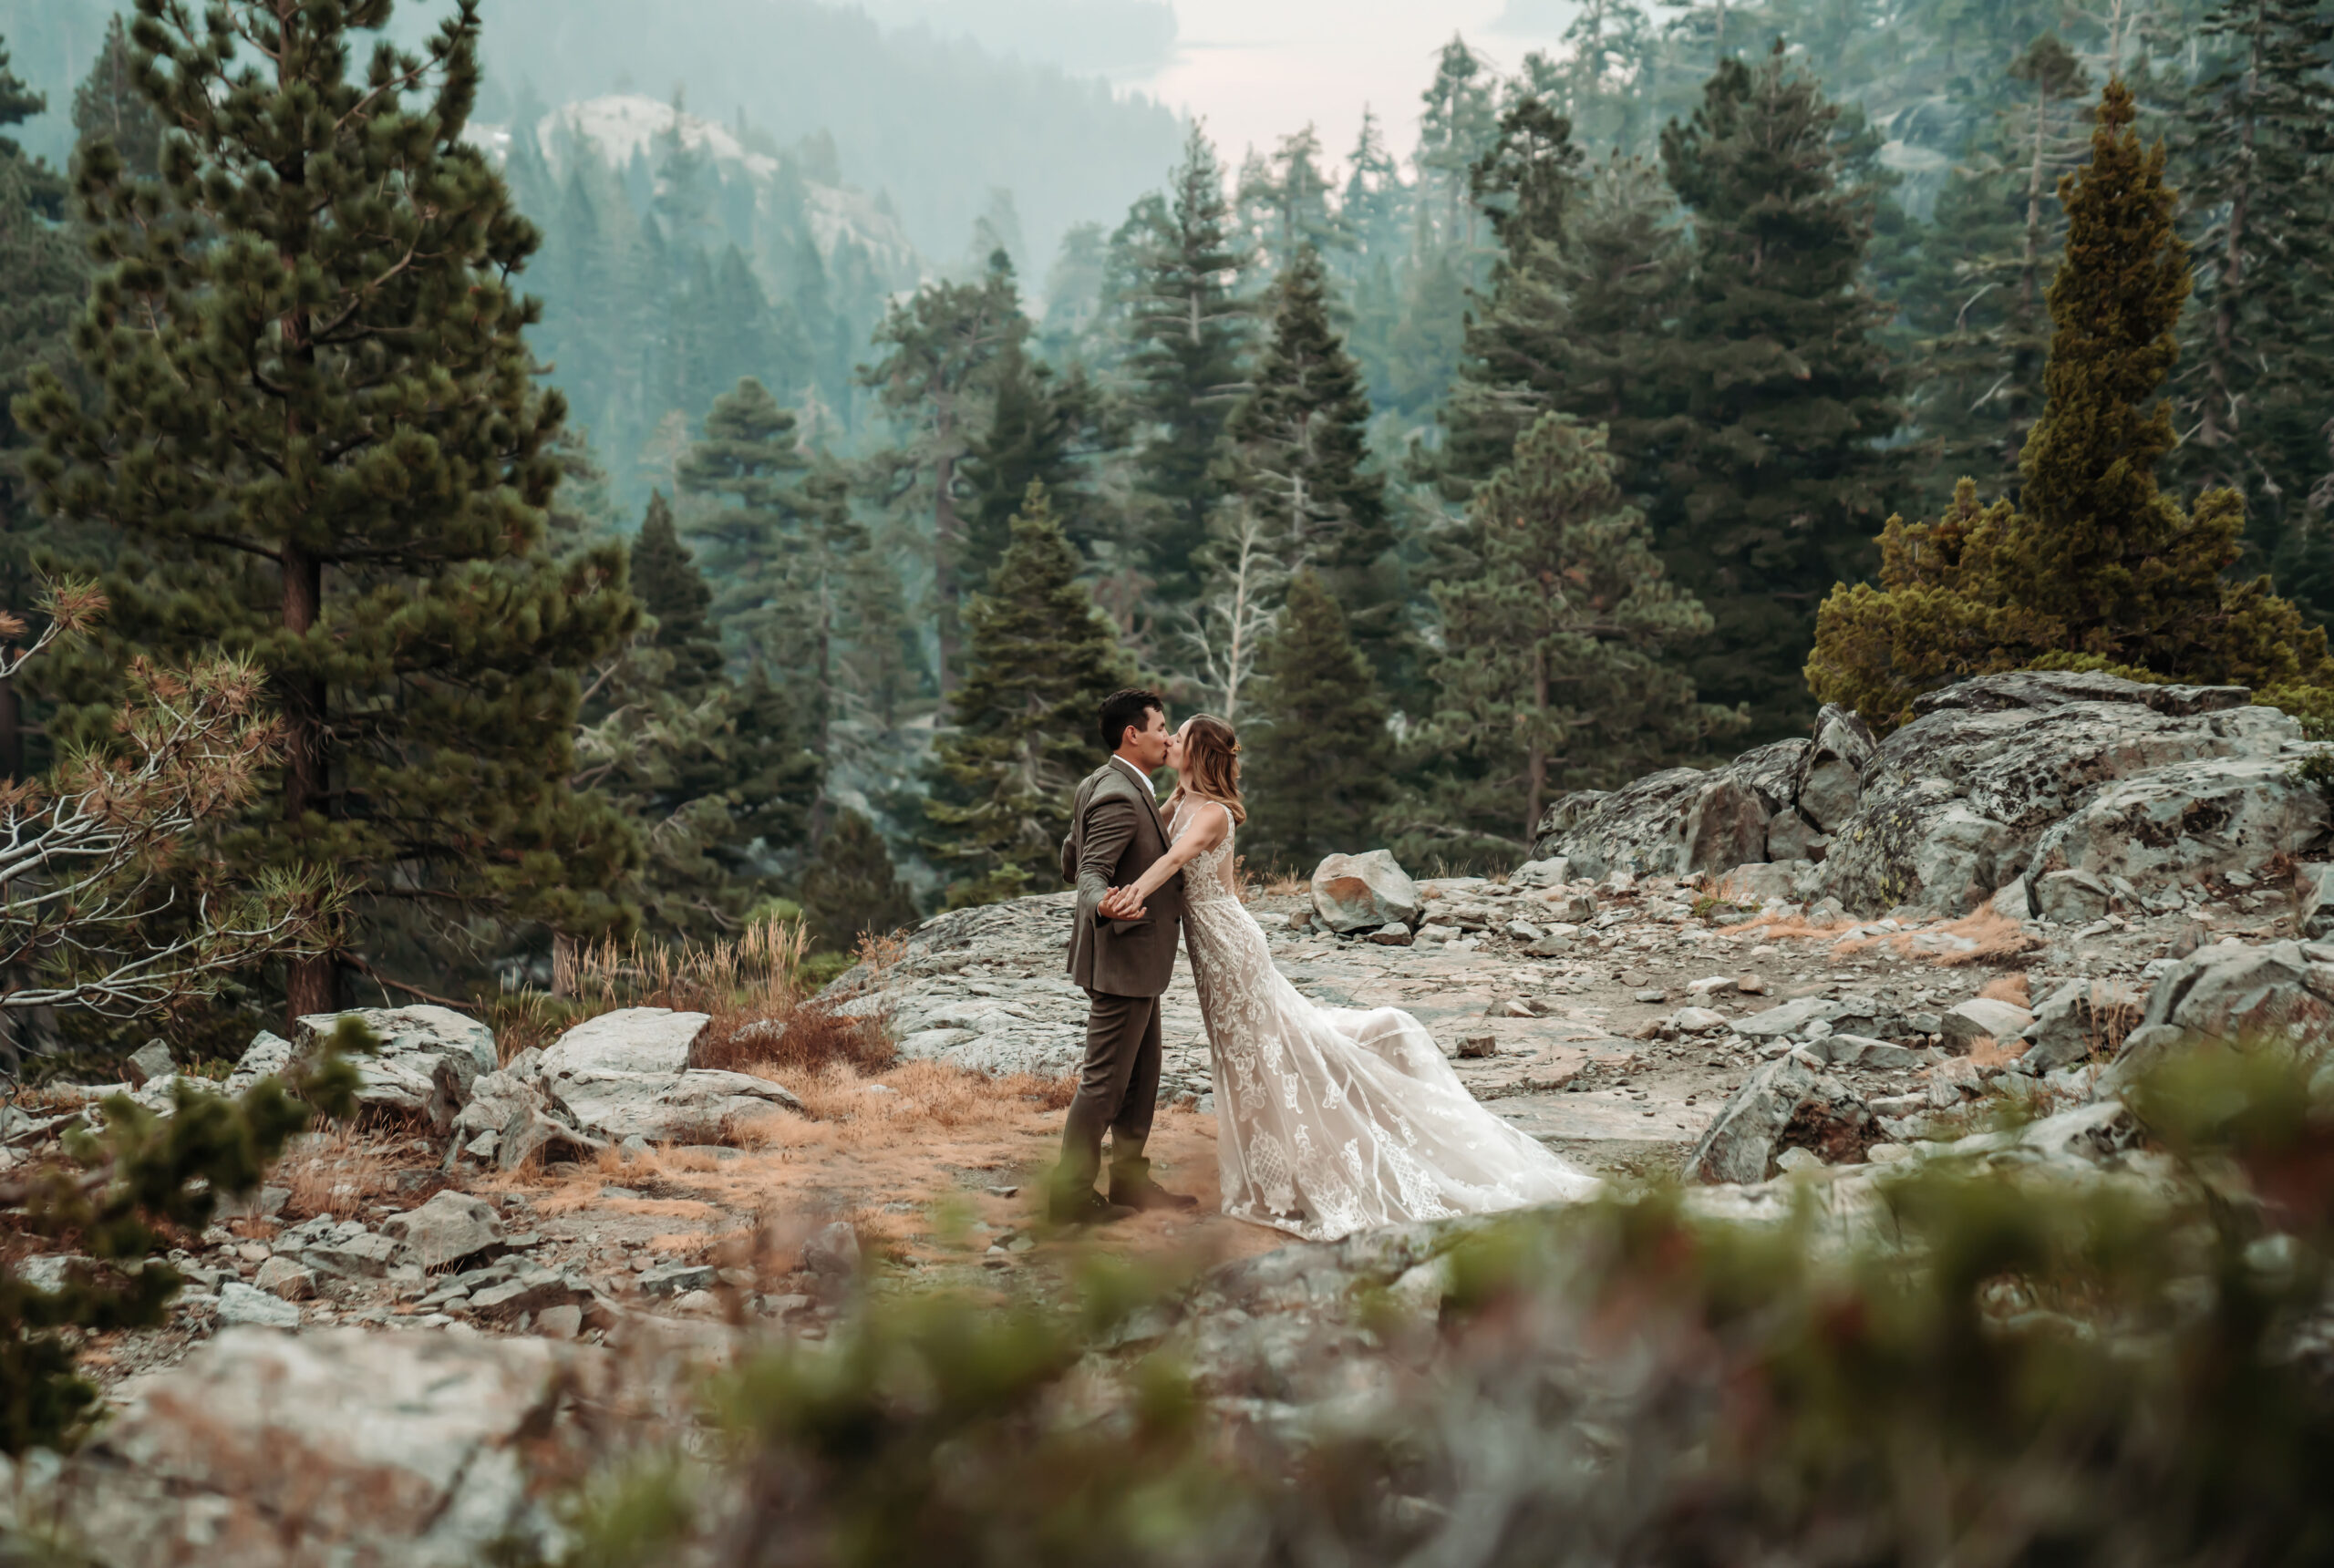 A wedding couple kissing in the mountains overlooking Emerald Bay in Lake Tahoe for their elopement day